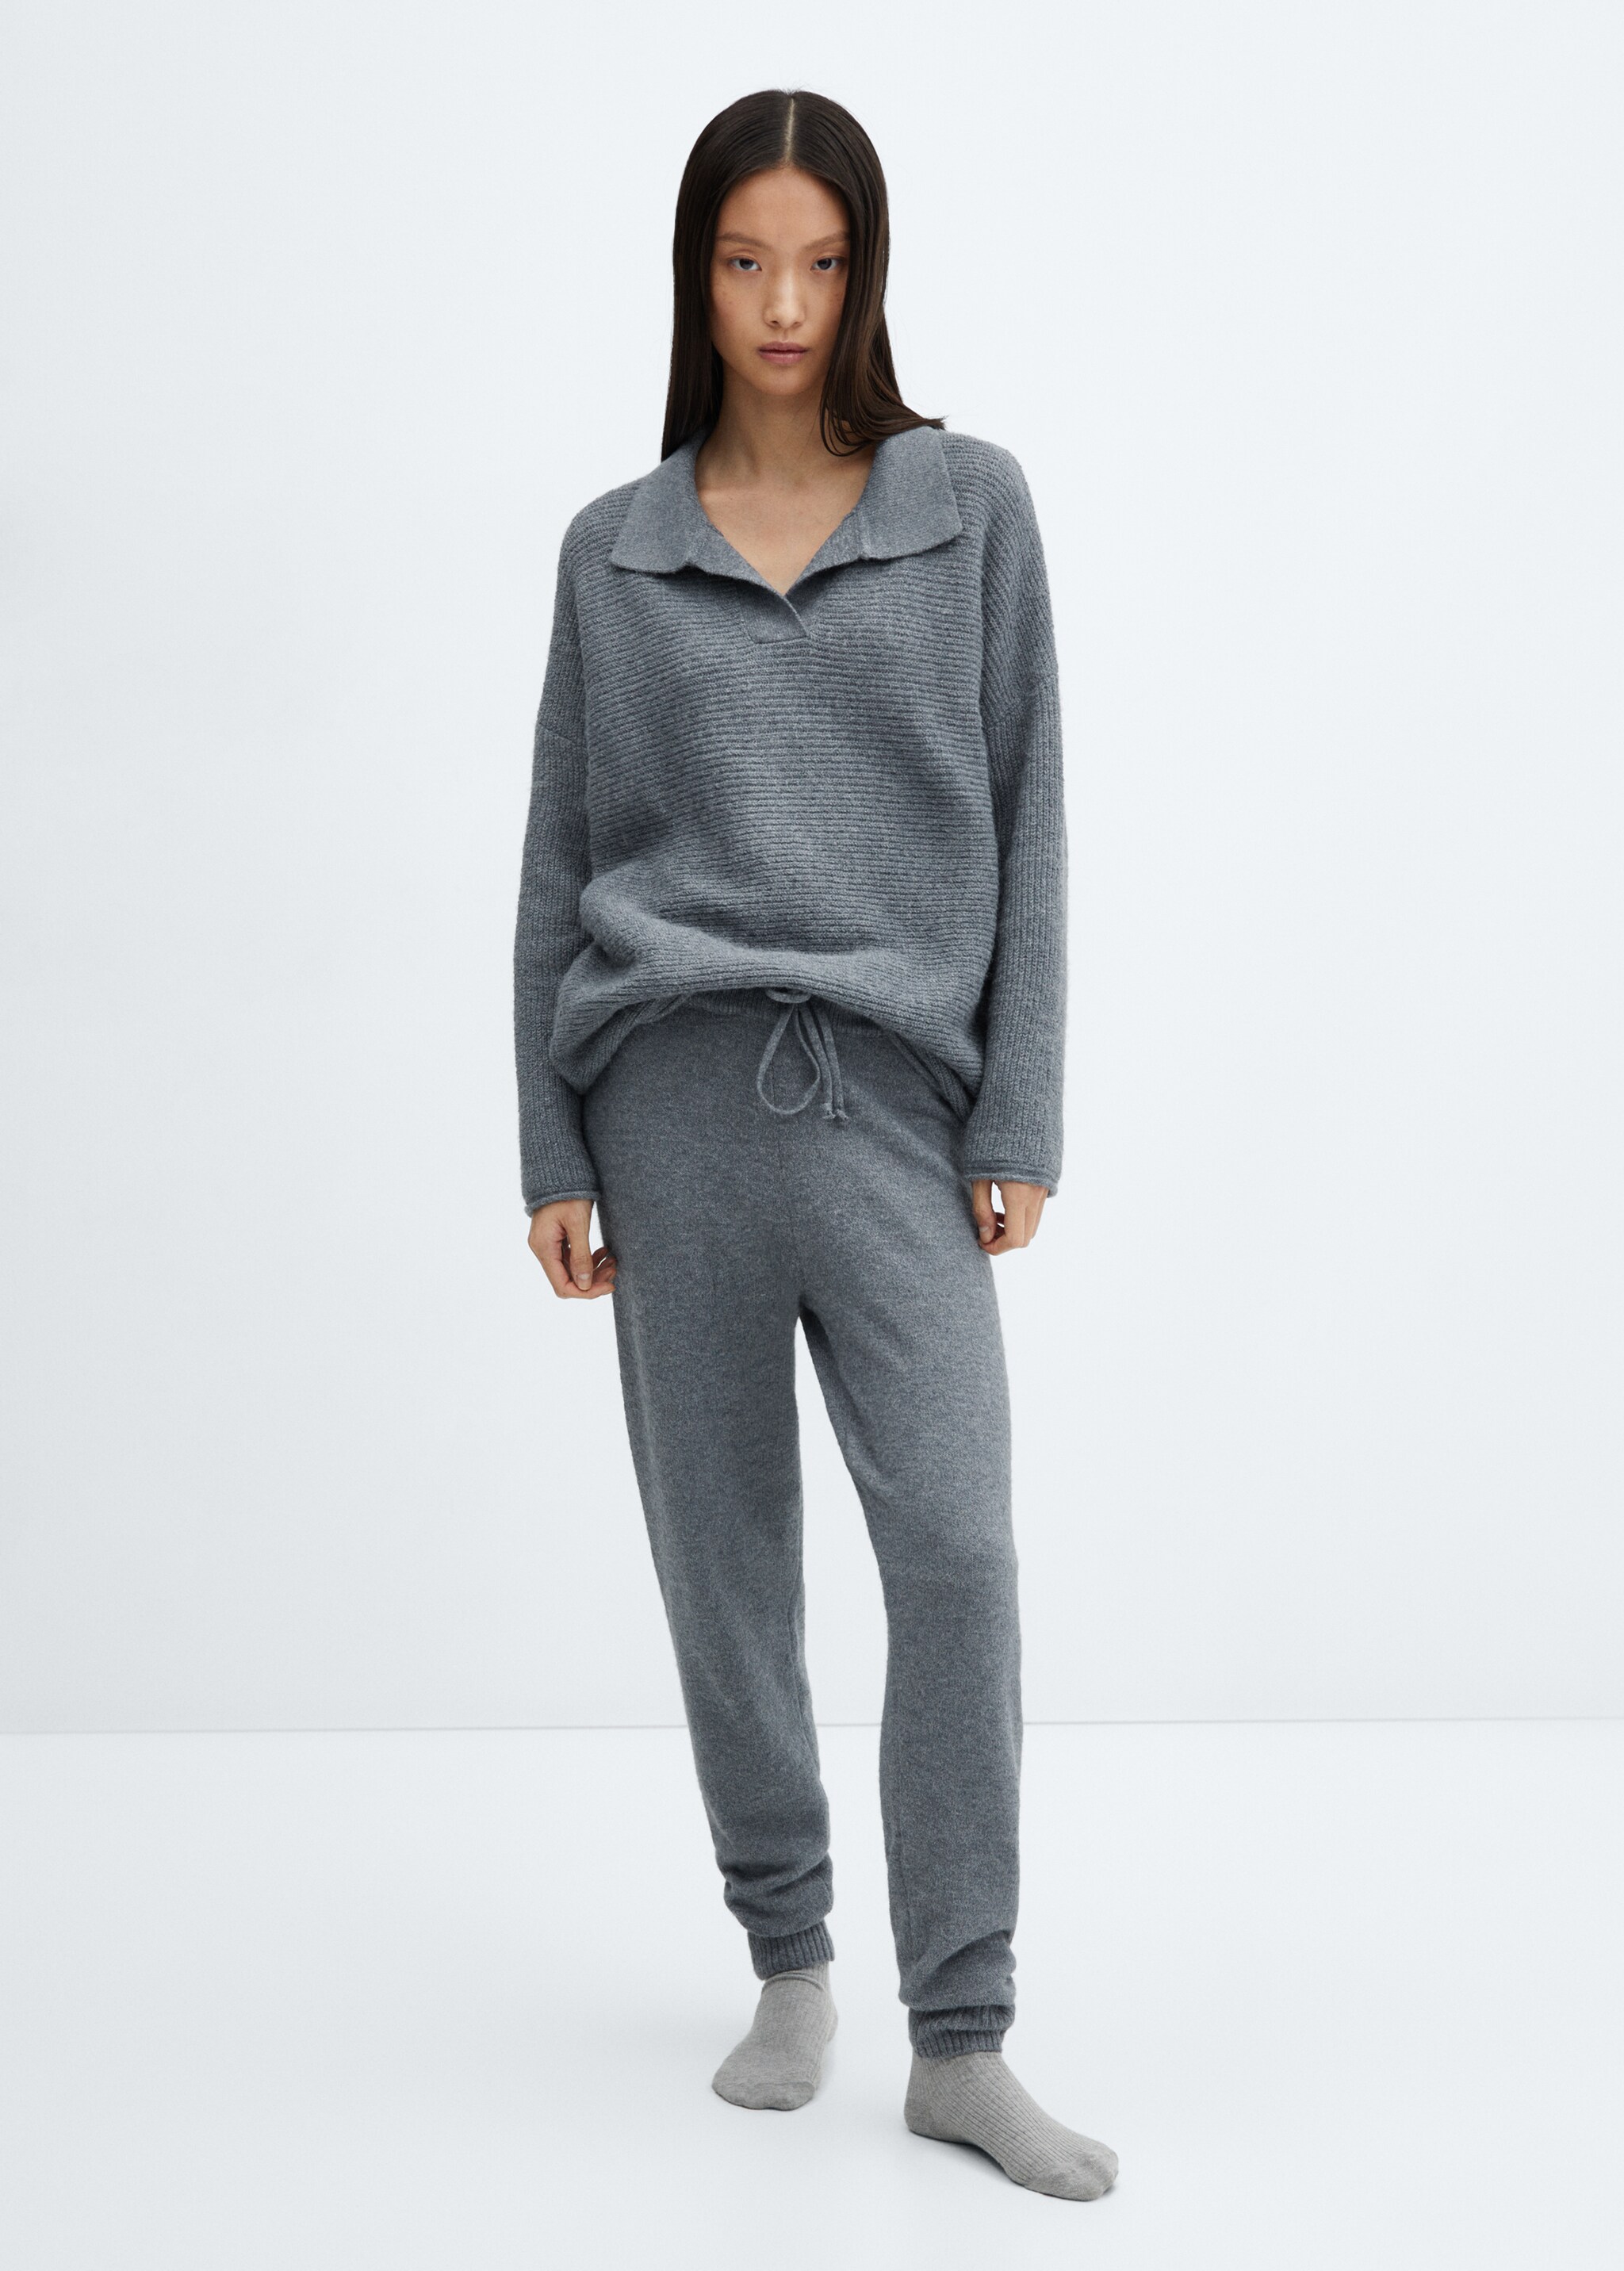 Knit jogger-style trousers - General plane